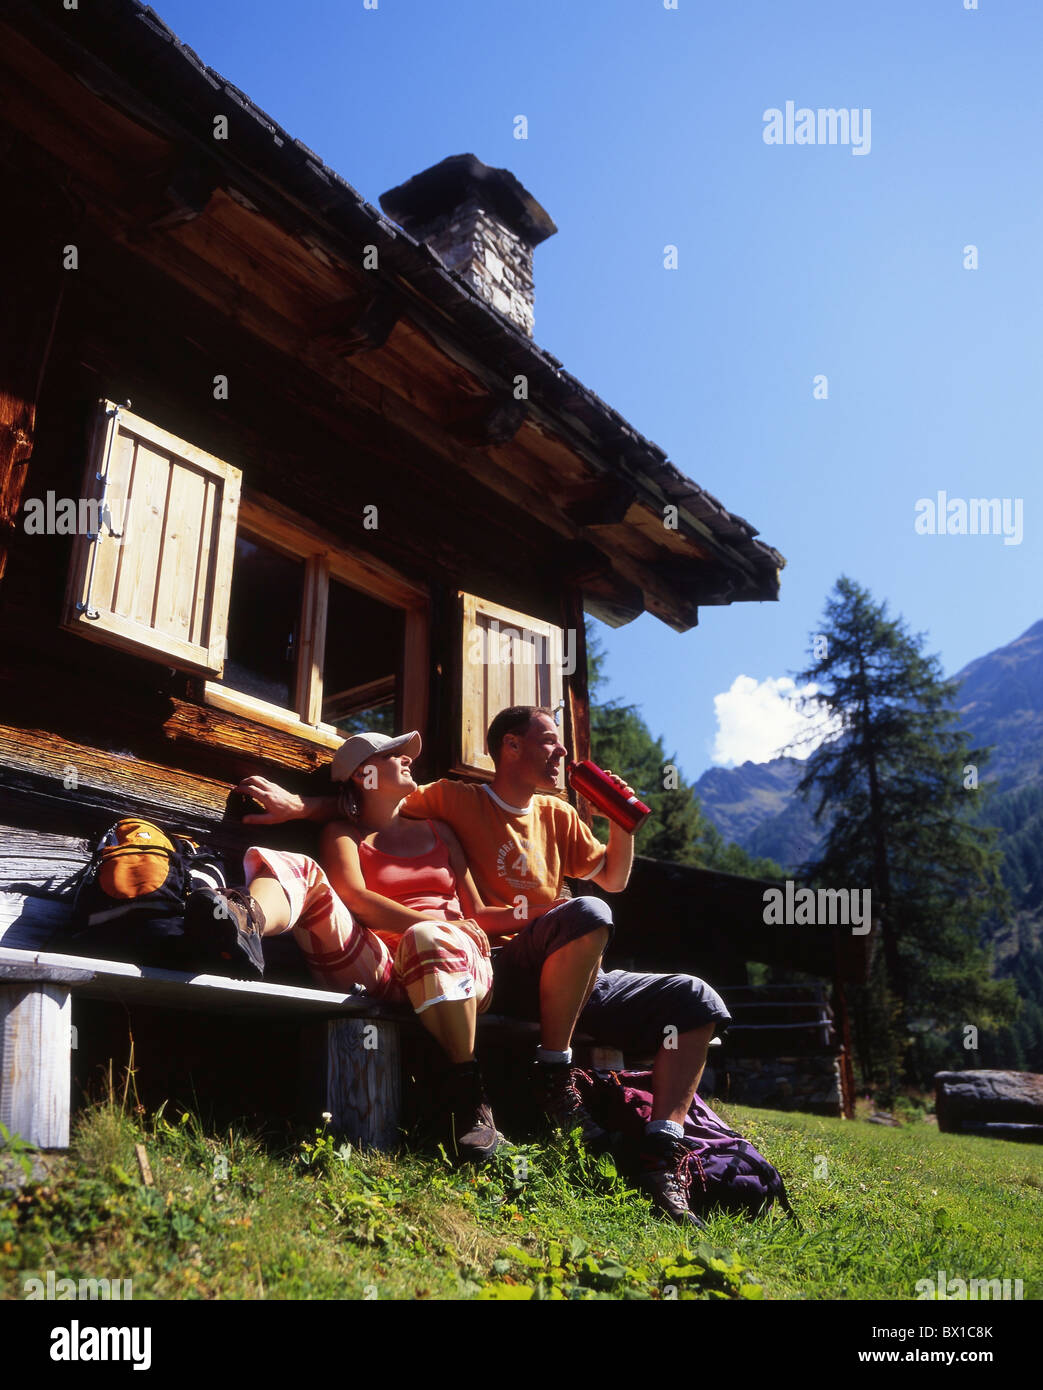 Hiking hiker couple relax rest picnic chalet hut house home mountains Alps alpine cabin Vinschgau Italy Stock Photo